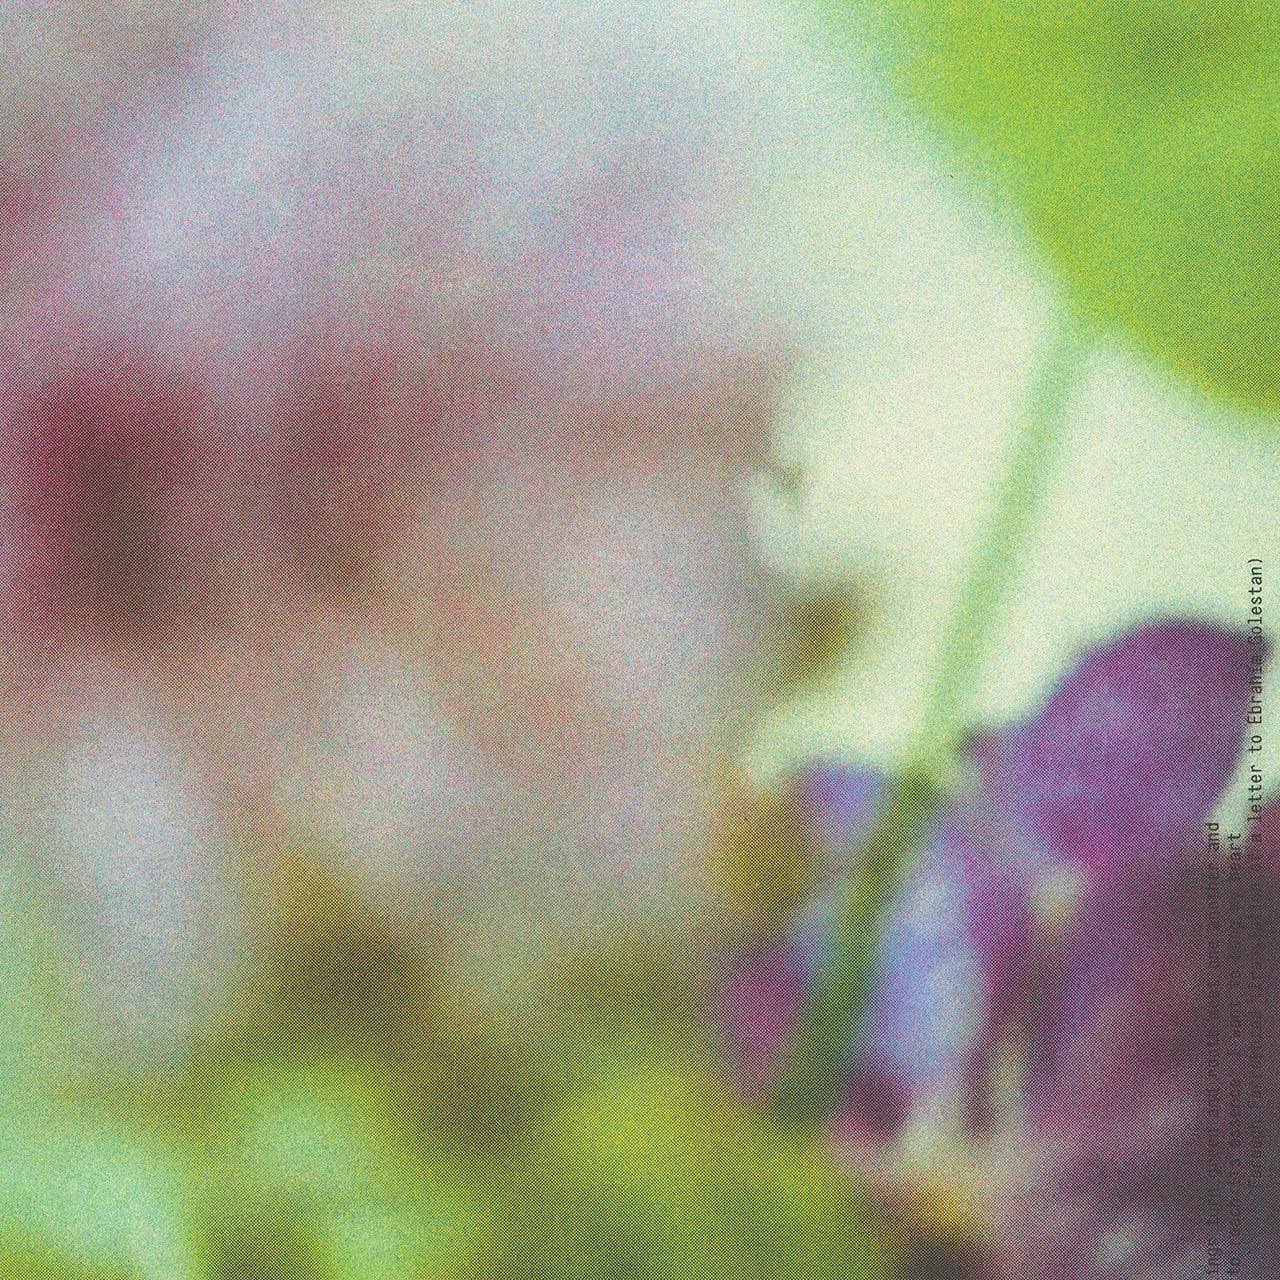 Up close detail of poster print for Banu Studio featuring blurry artistic photography of flowers